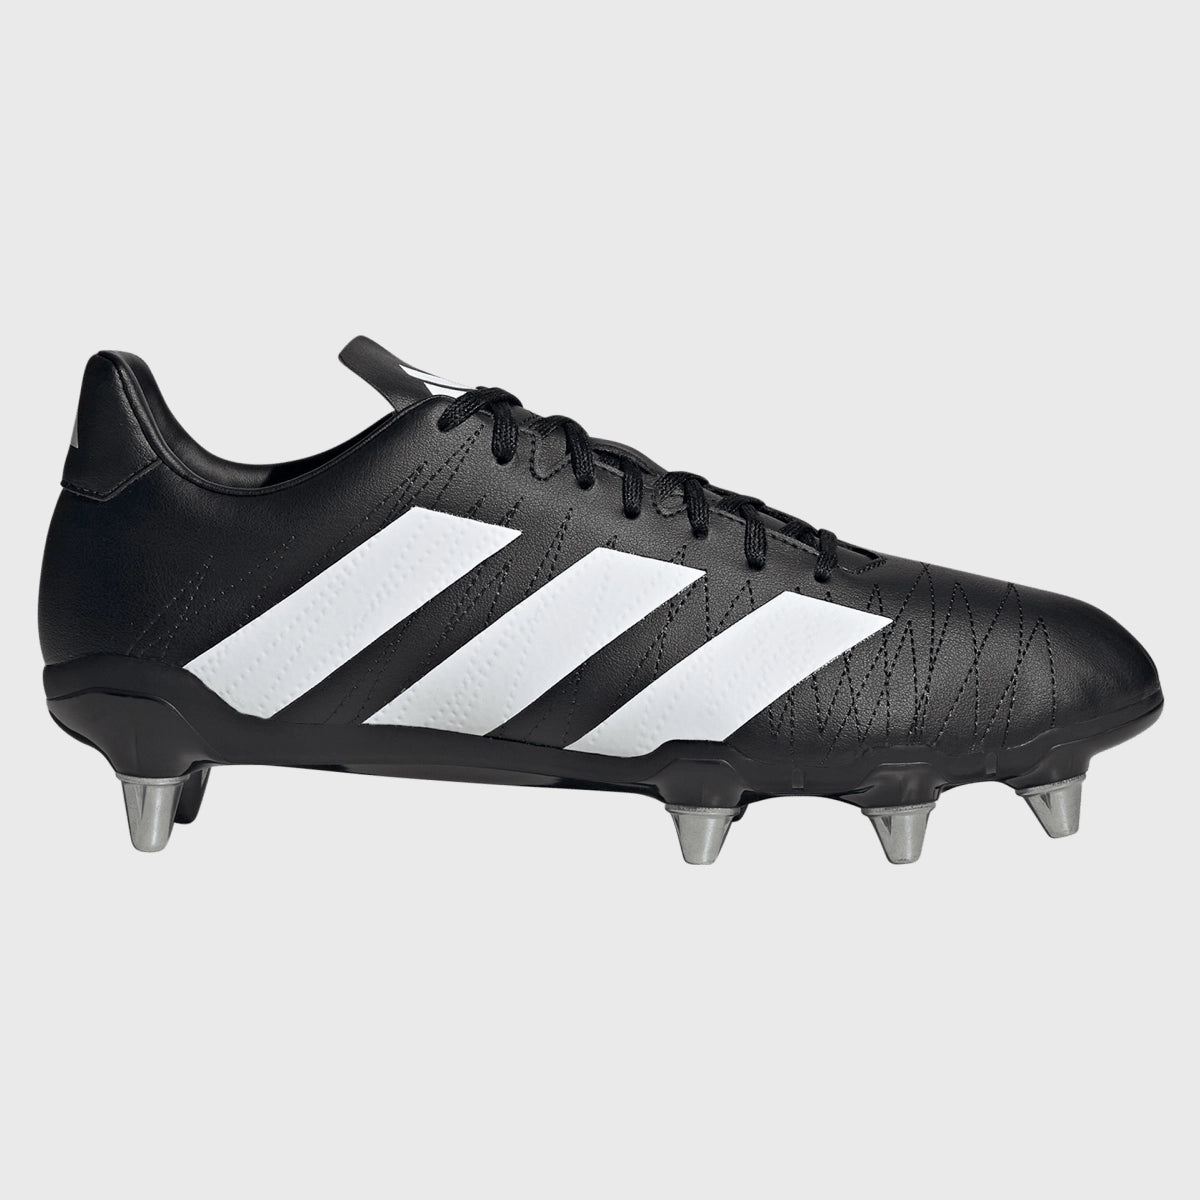 Buy online Adidas Kakari SG Rugby Boots in Black, White and Carbon